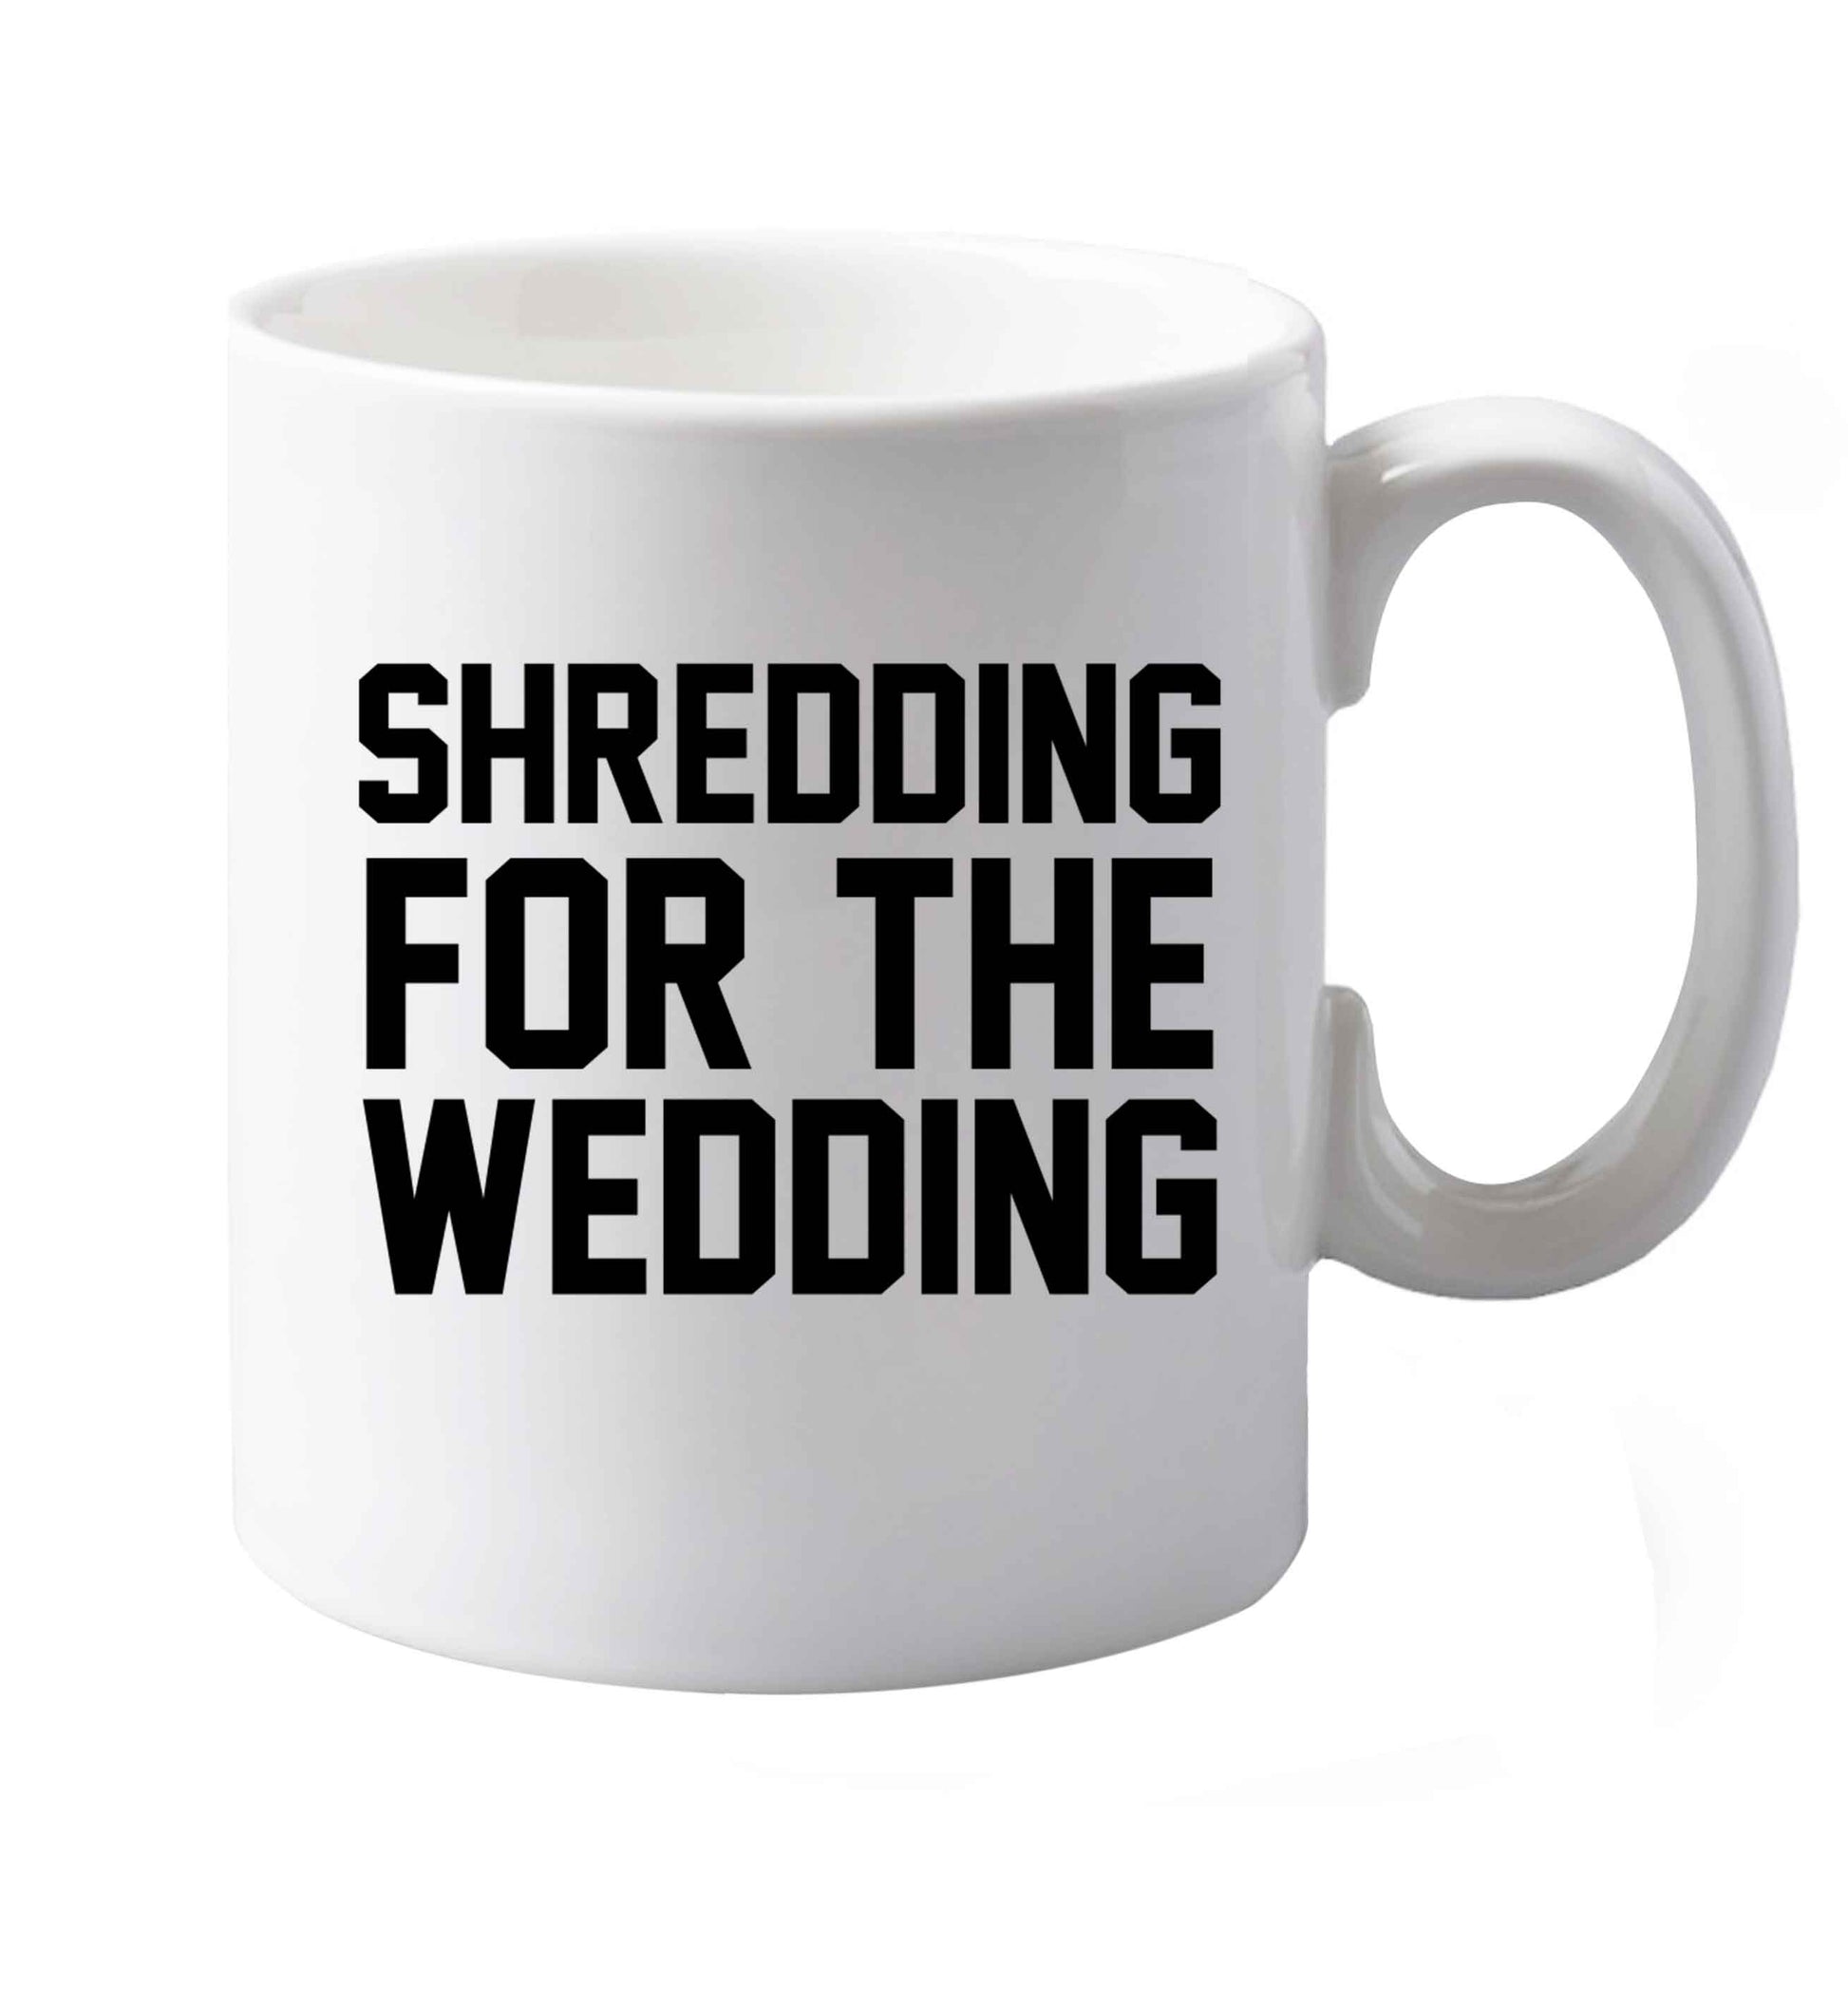 10 oz Get motivated and get fit for your big day! Our workout quotes and designs will get you ready to sweat! Perfect for any bride, groom or bridesmaid to be!    ceramic mug both sides